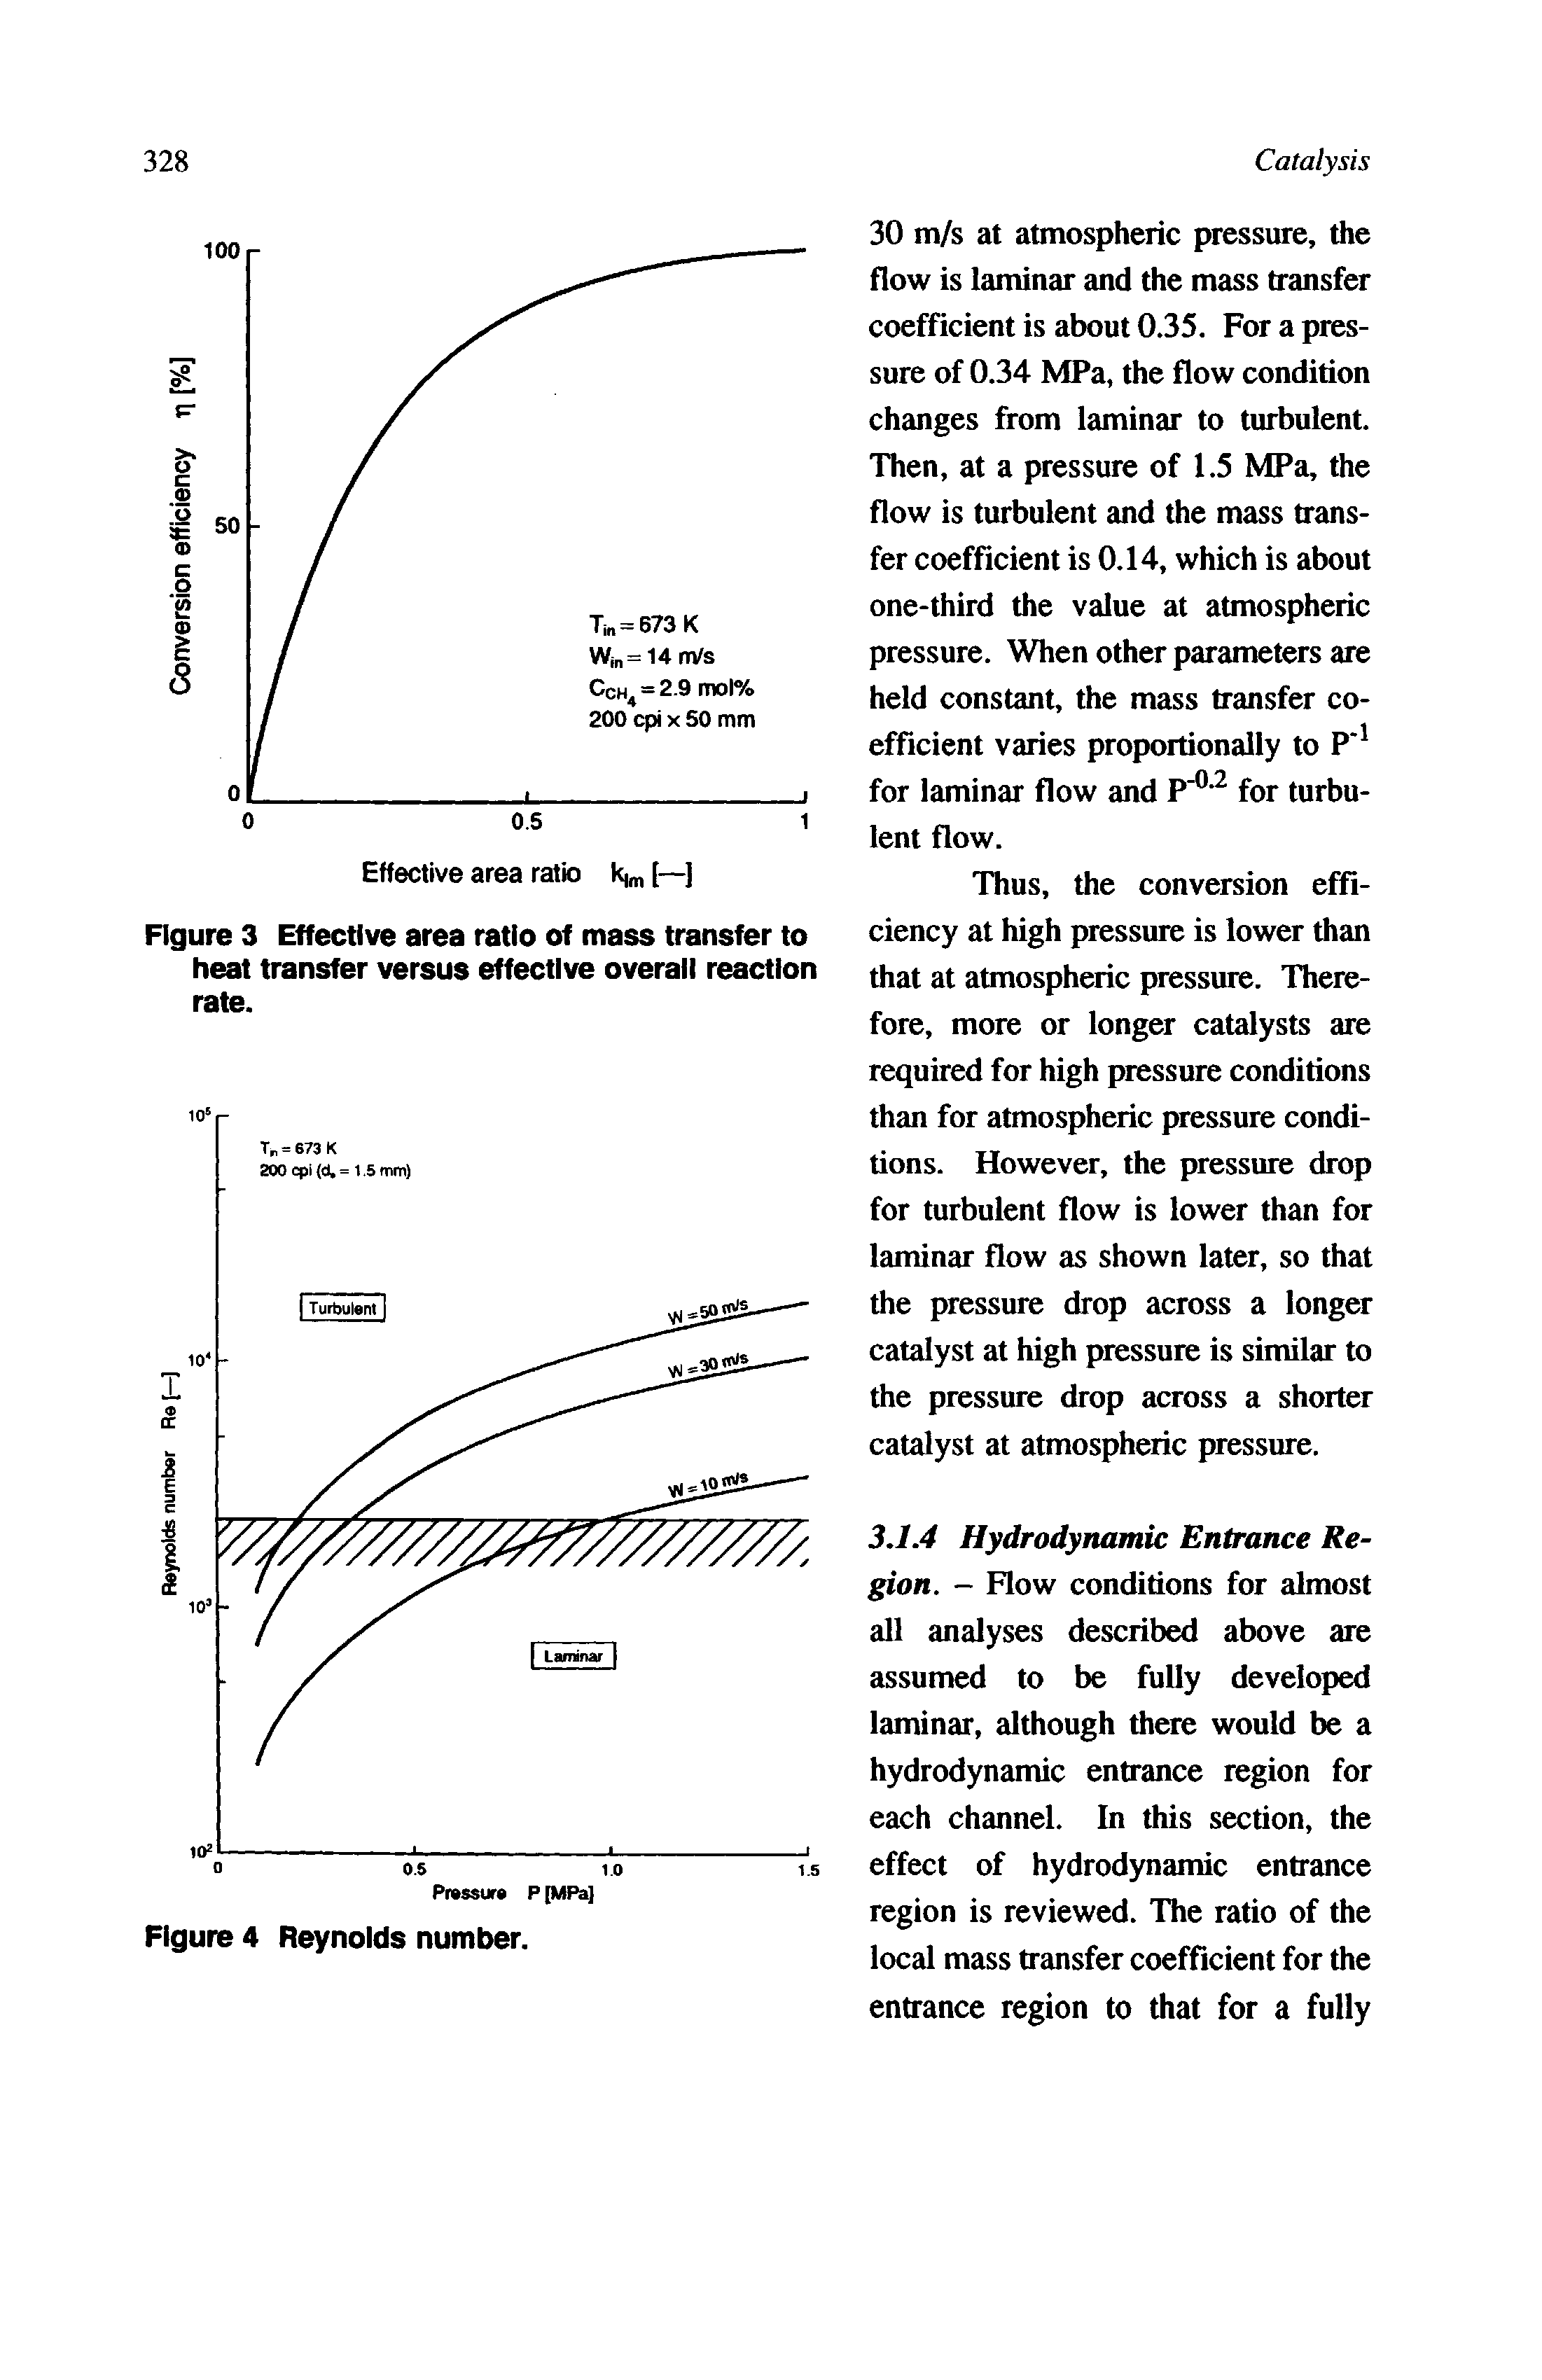 Figure 3 Effective area ratio of mass transfer to heat transfer versus effective overall reaction rate.